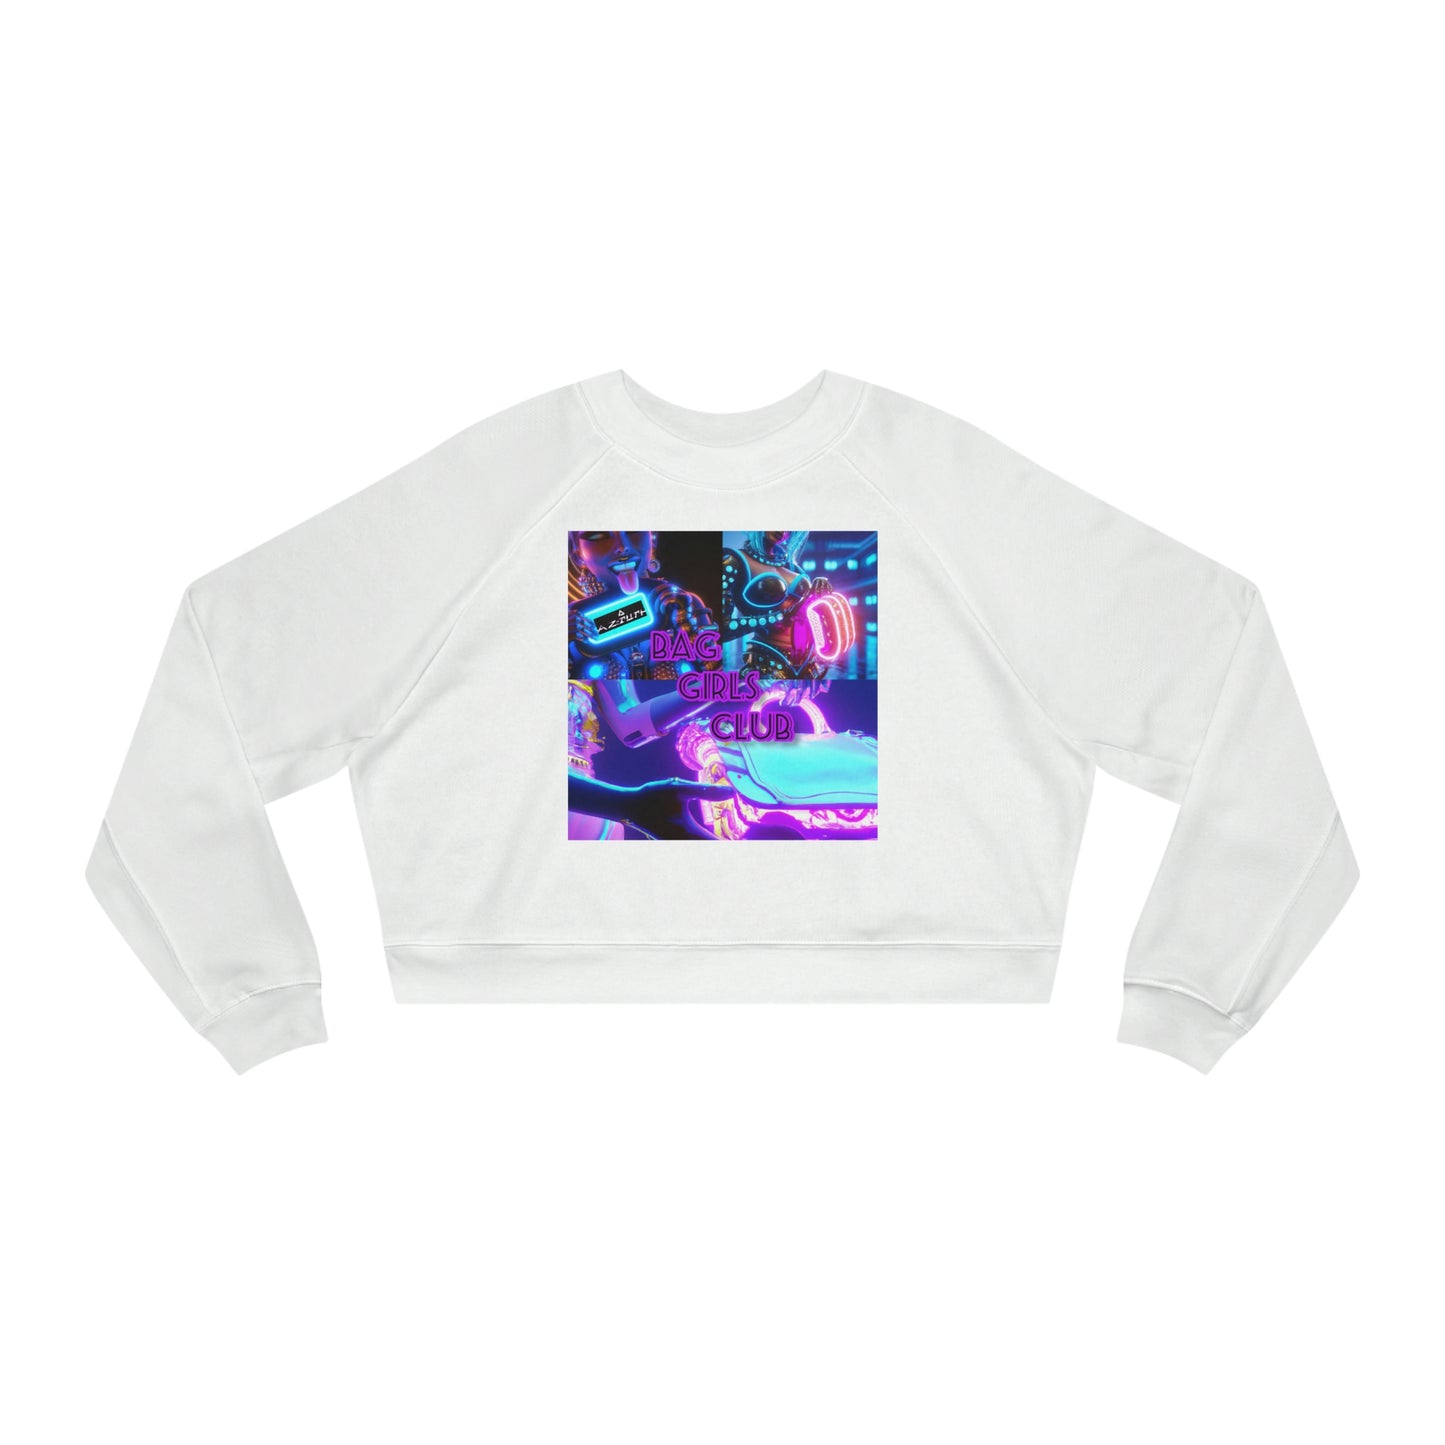 Atziluth Gallery Womens Cropped Sweater "Bag Girls Club"